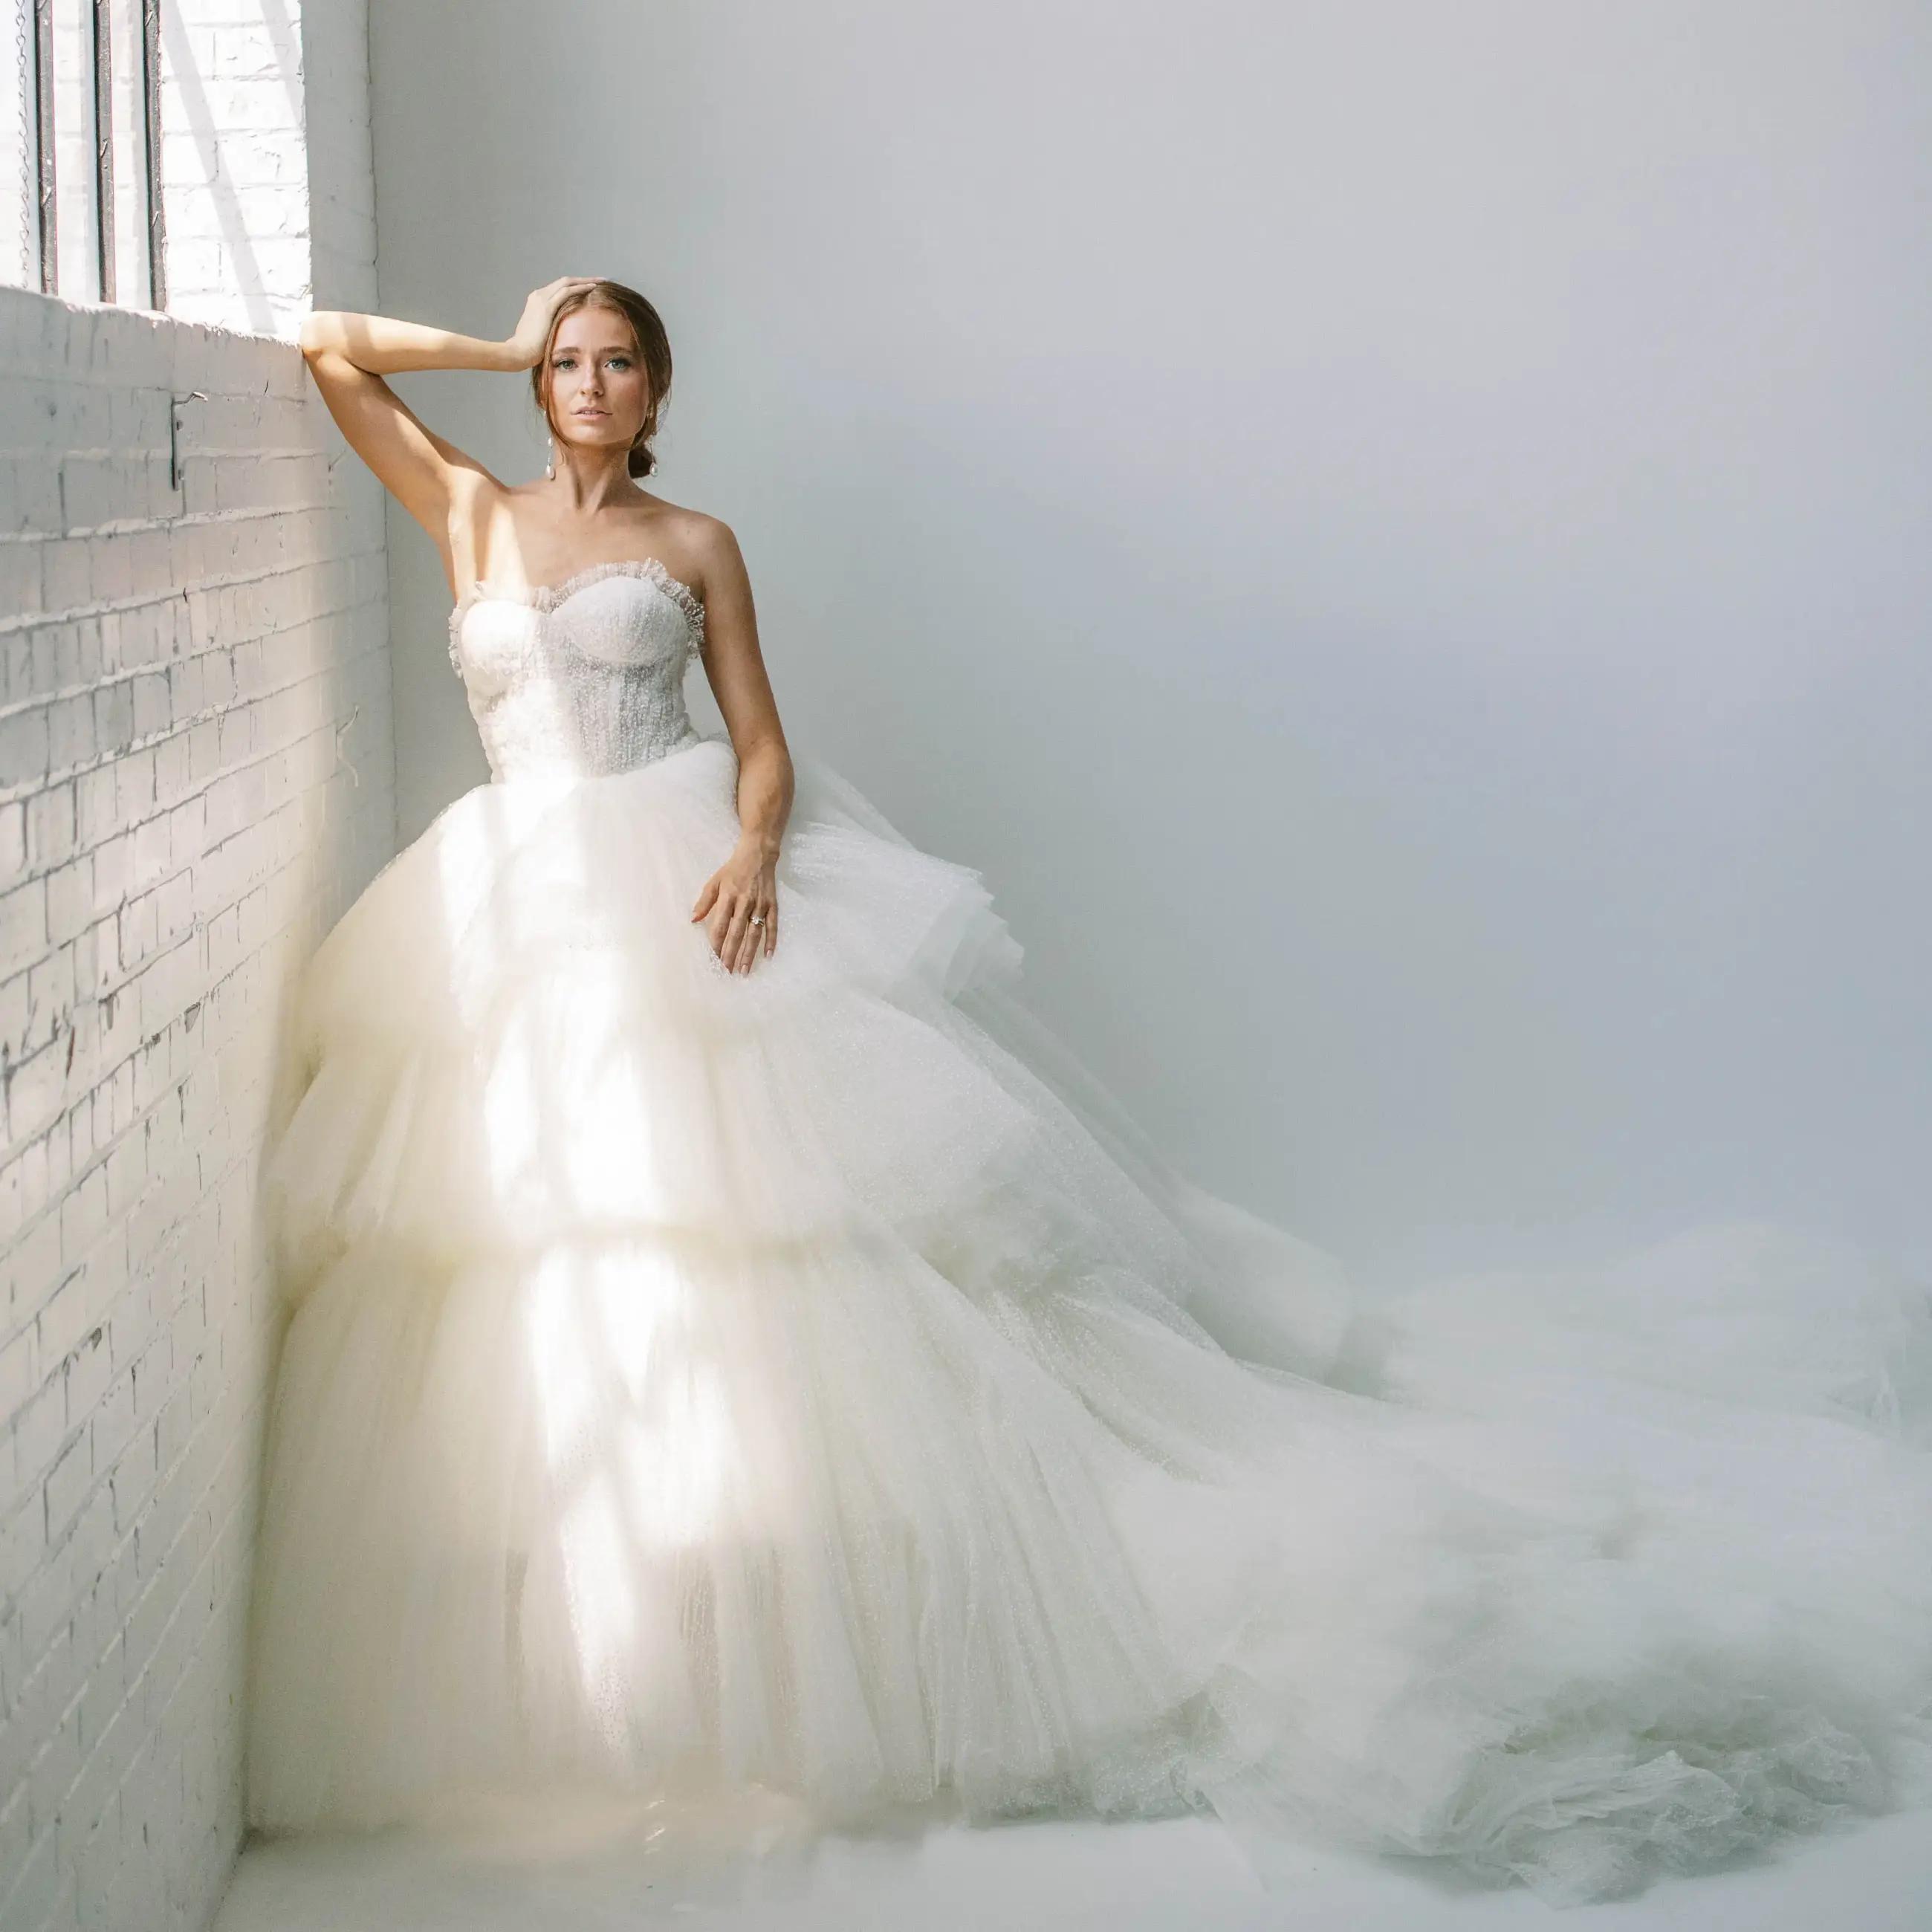 Ballgown or Mermaid? How to Pick Your Bridal Silhouette. Desktop Image